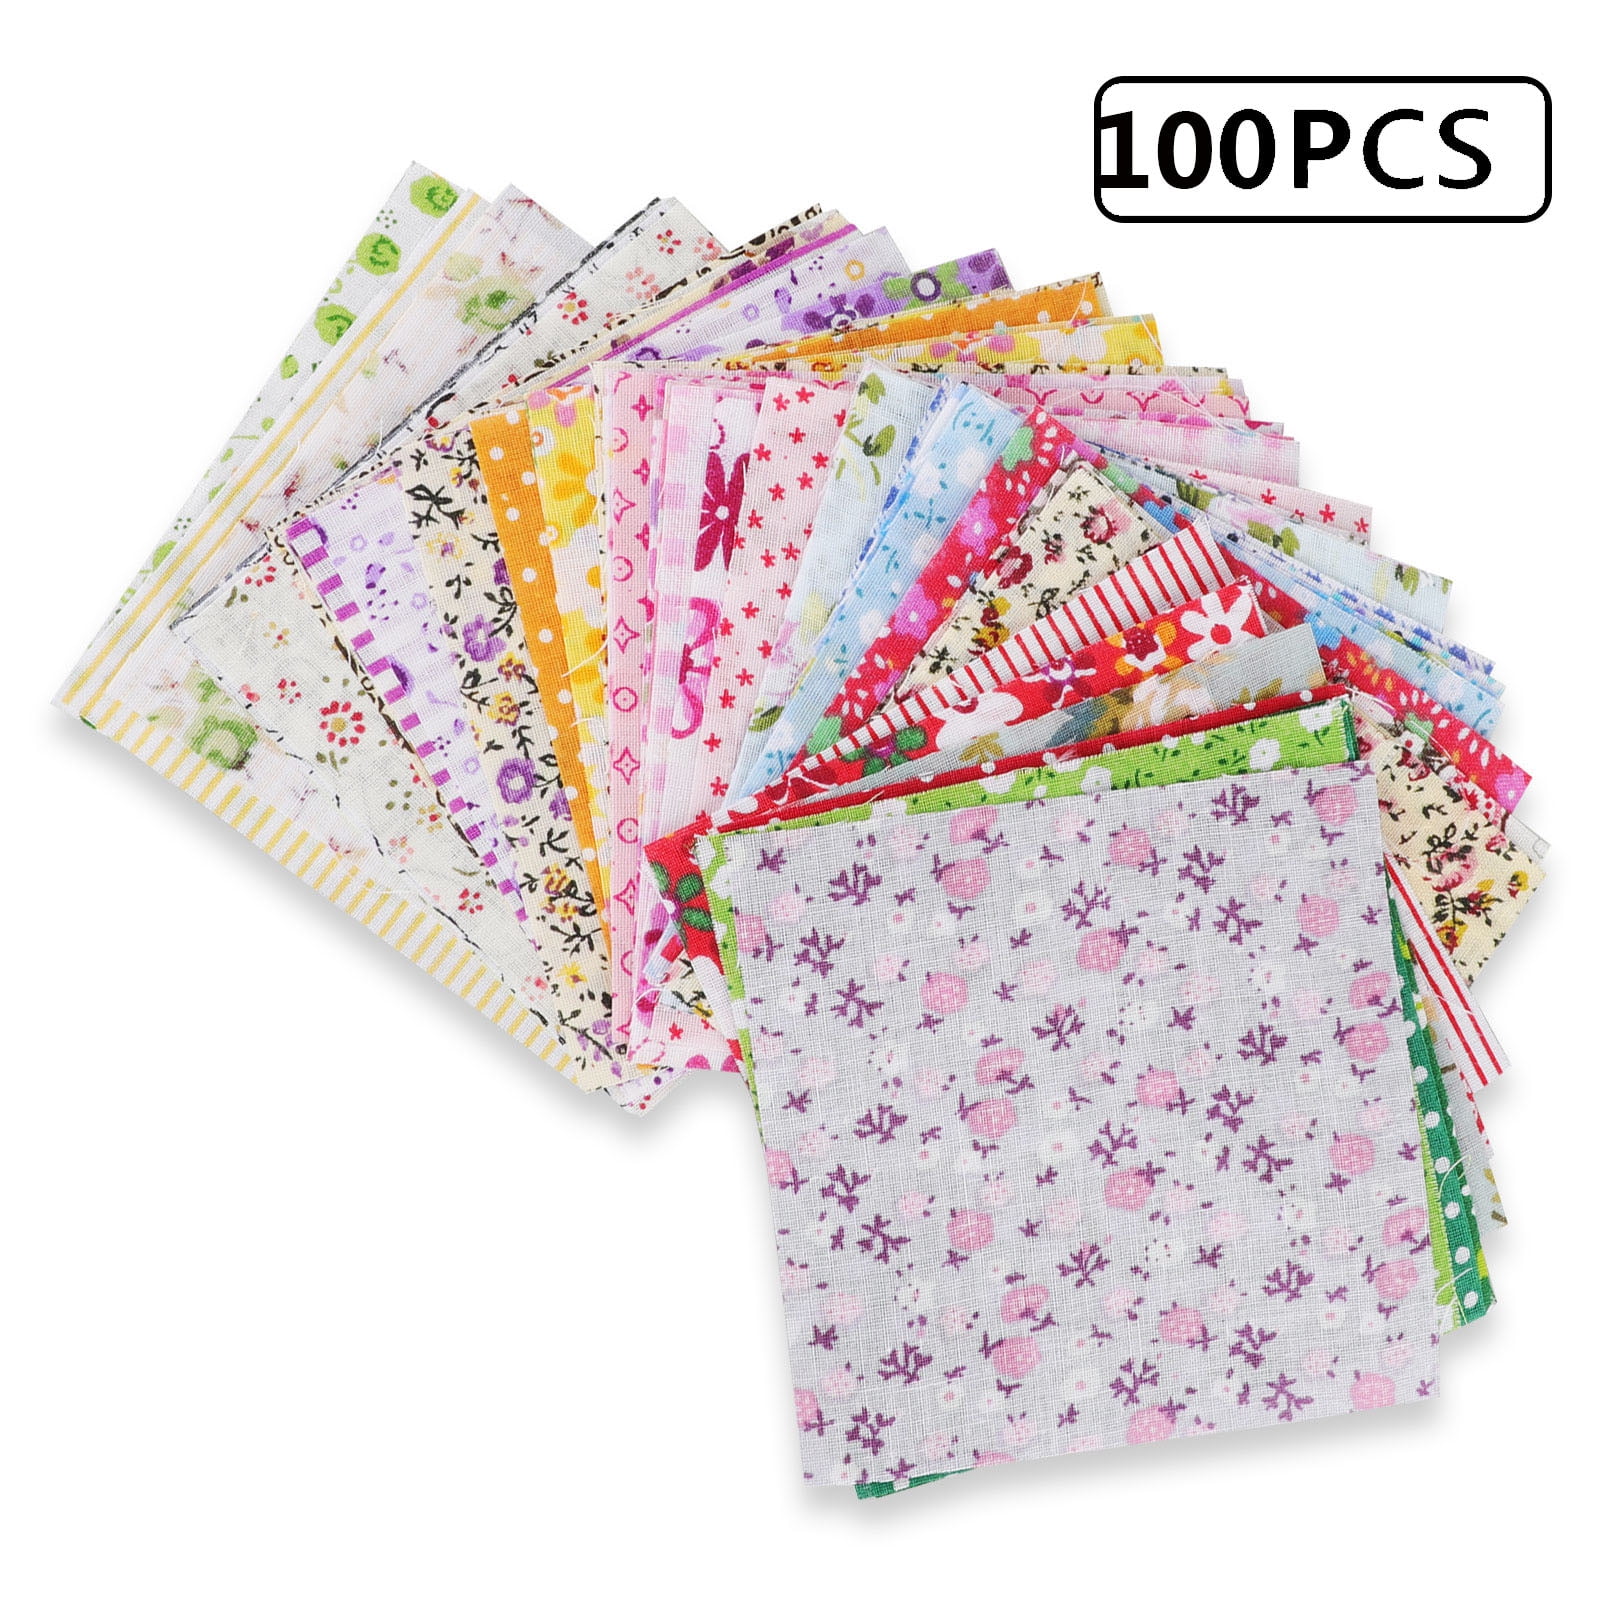 7 Pcs Cotton Floral Fabric Bundles Fresh Patchwork Fabric Squares Sheets  DIY Quilting Fabric for Scrapbooking Crafting Sewing - AliExpress